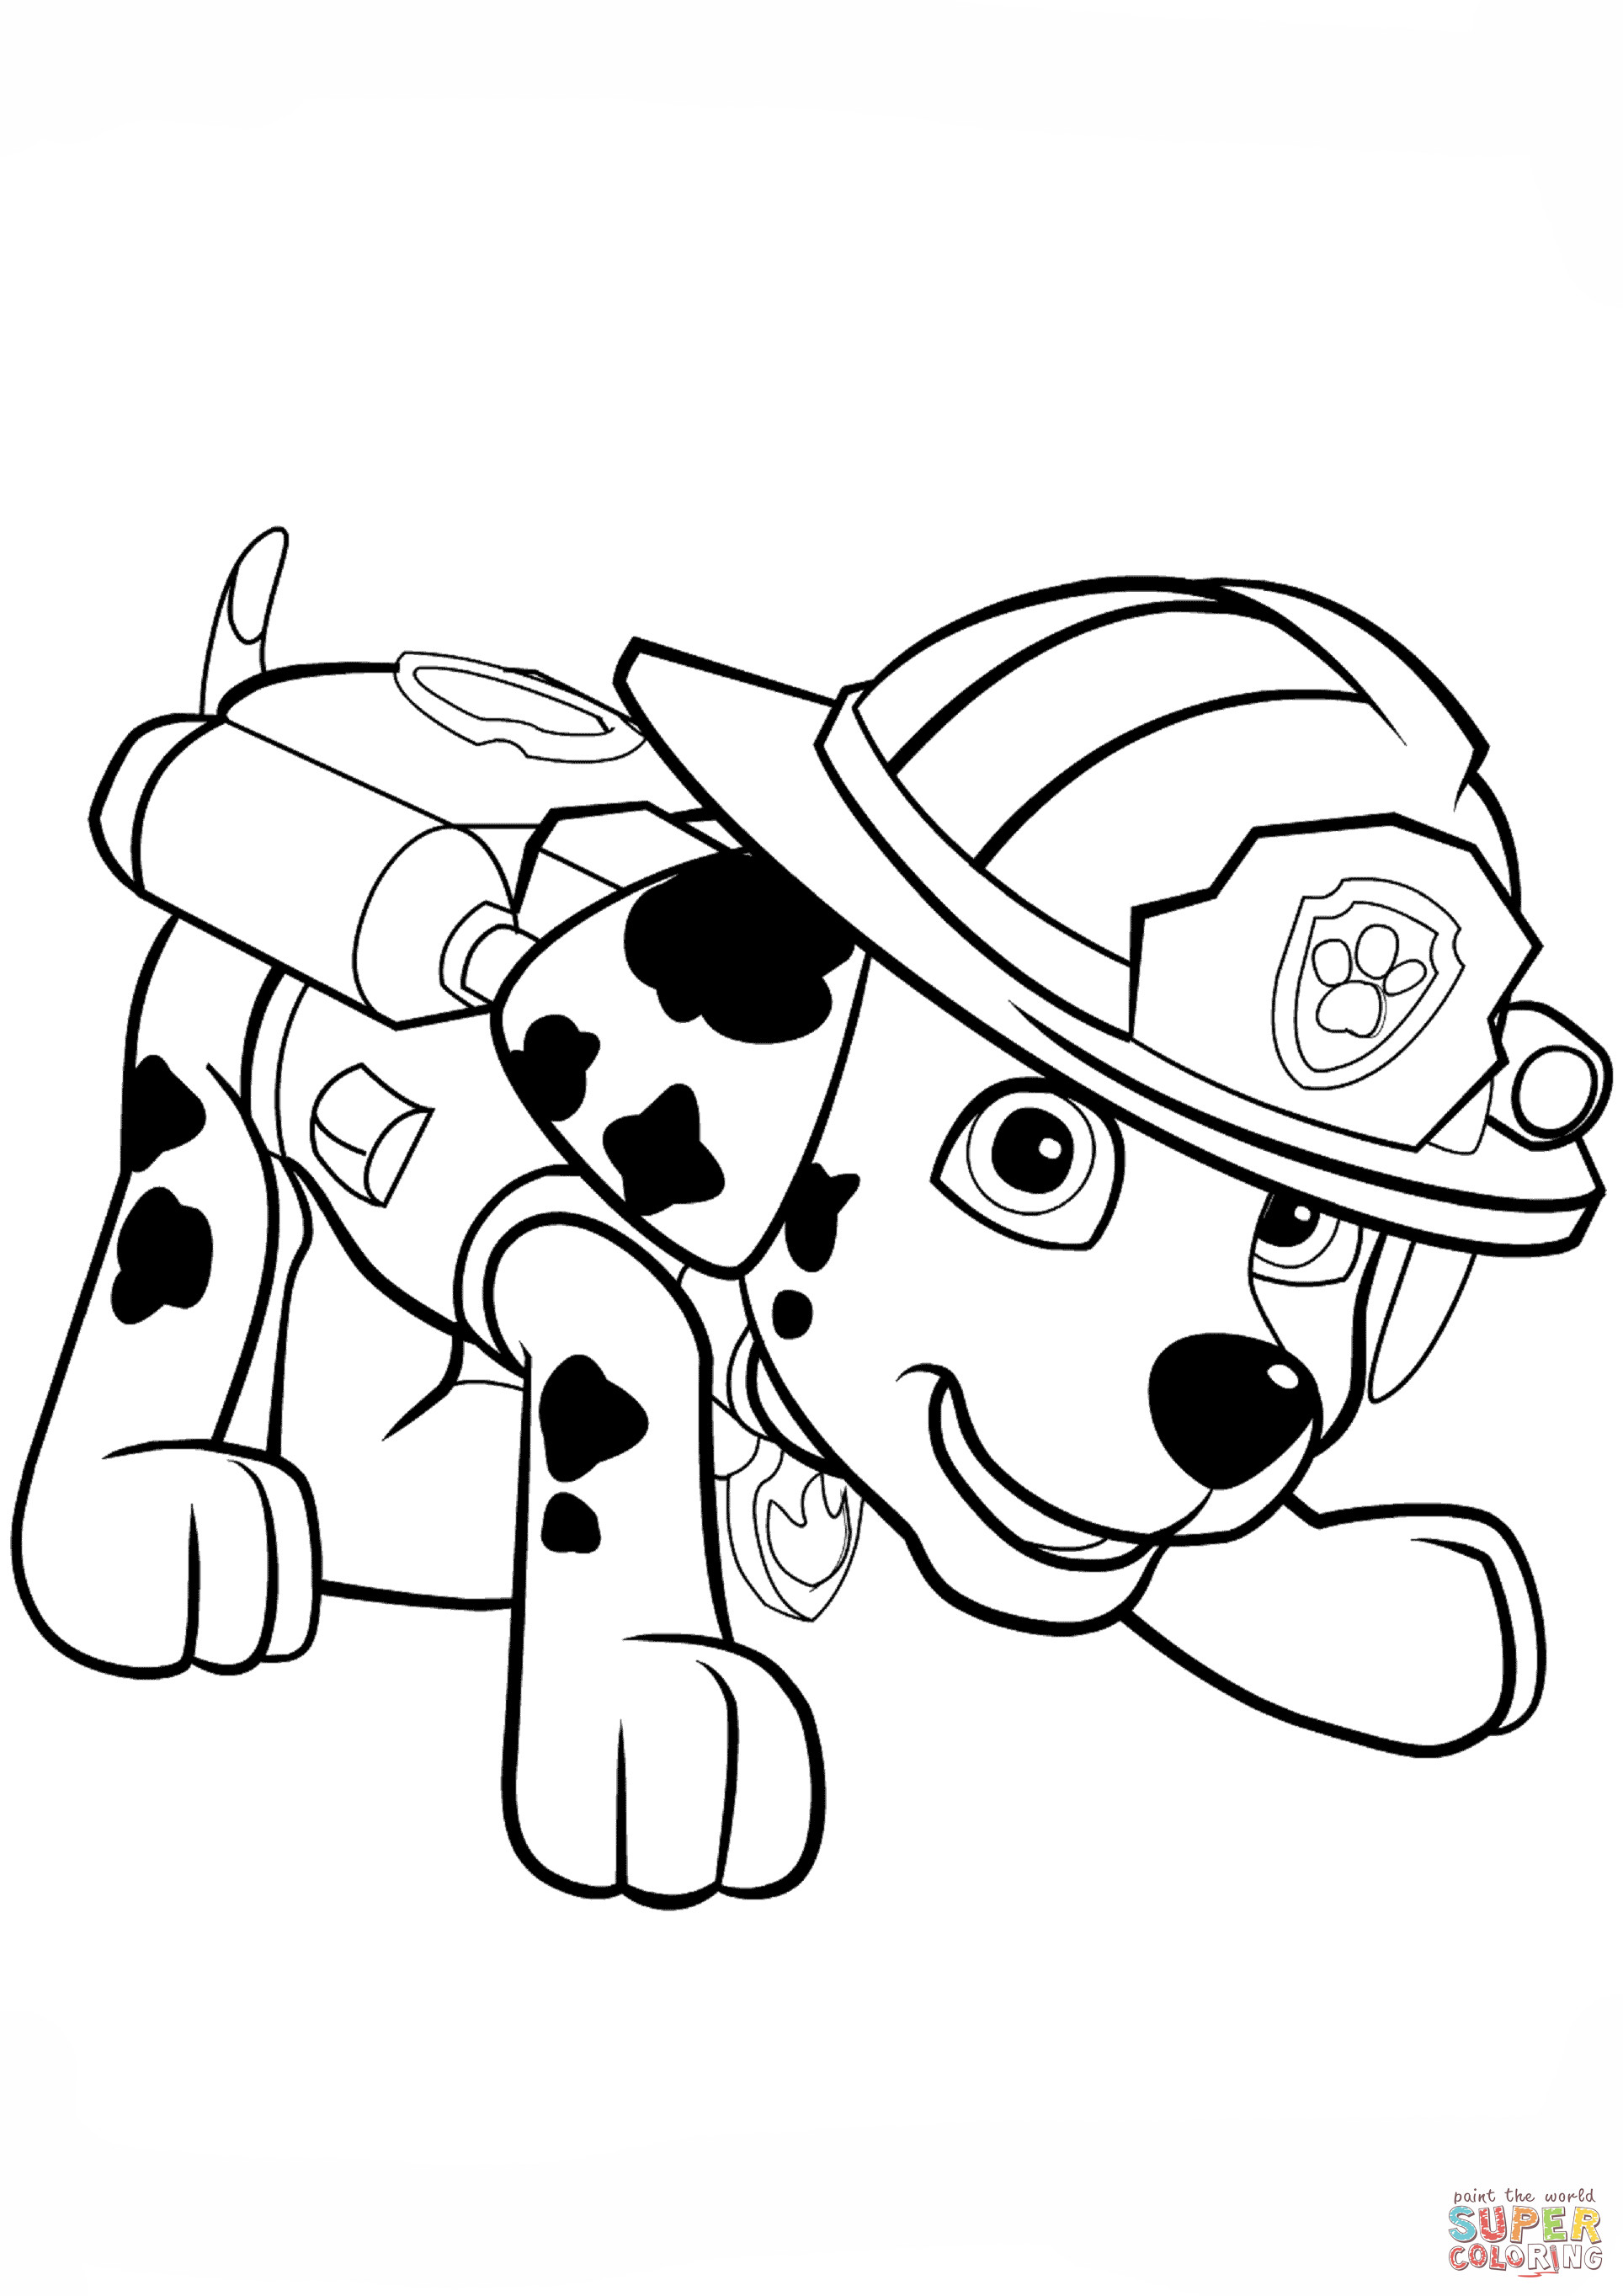 Paw Patrol Coloring Pages Marshall
 Paw Patrol Marshall Puppy coloring page